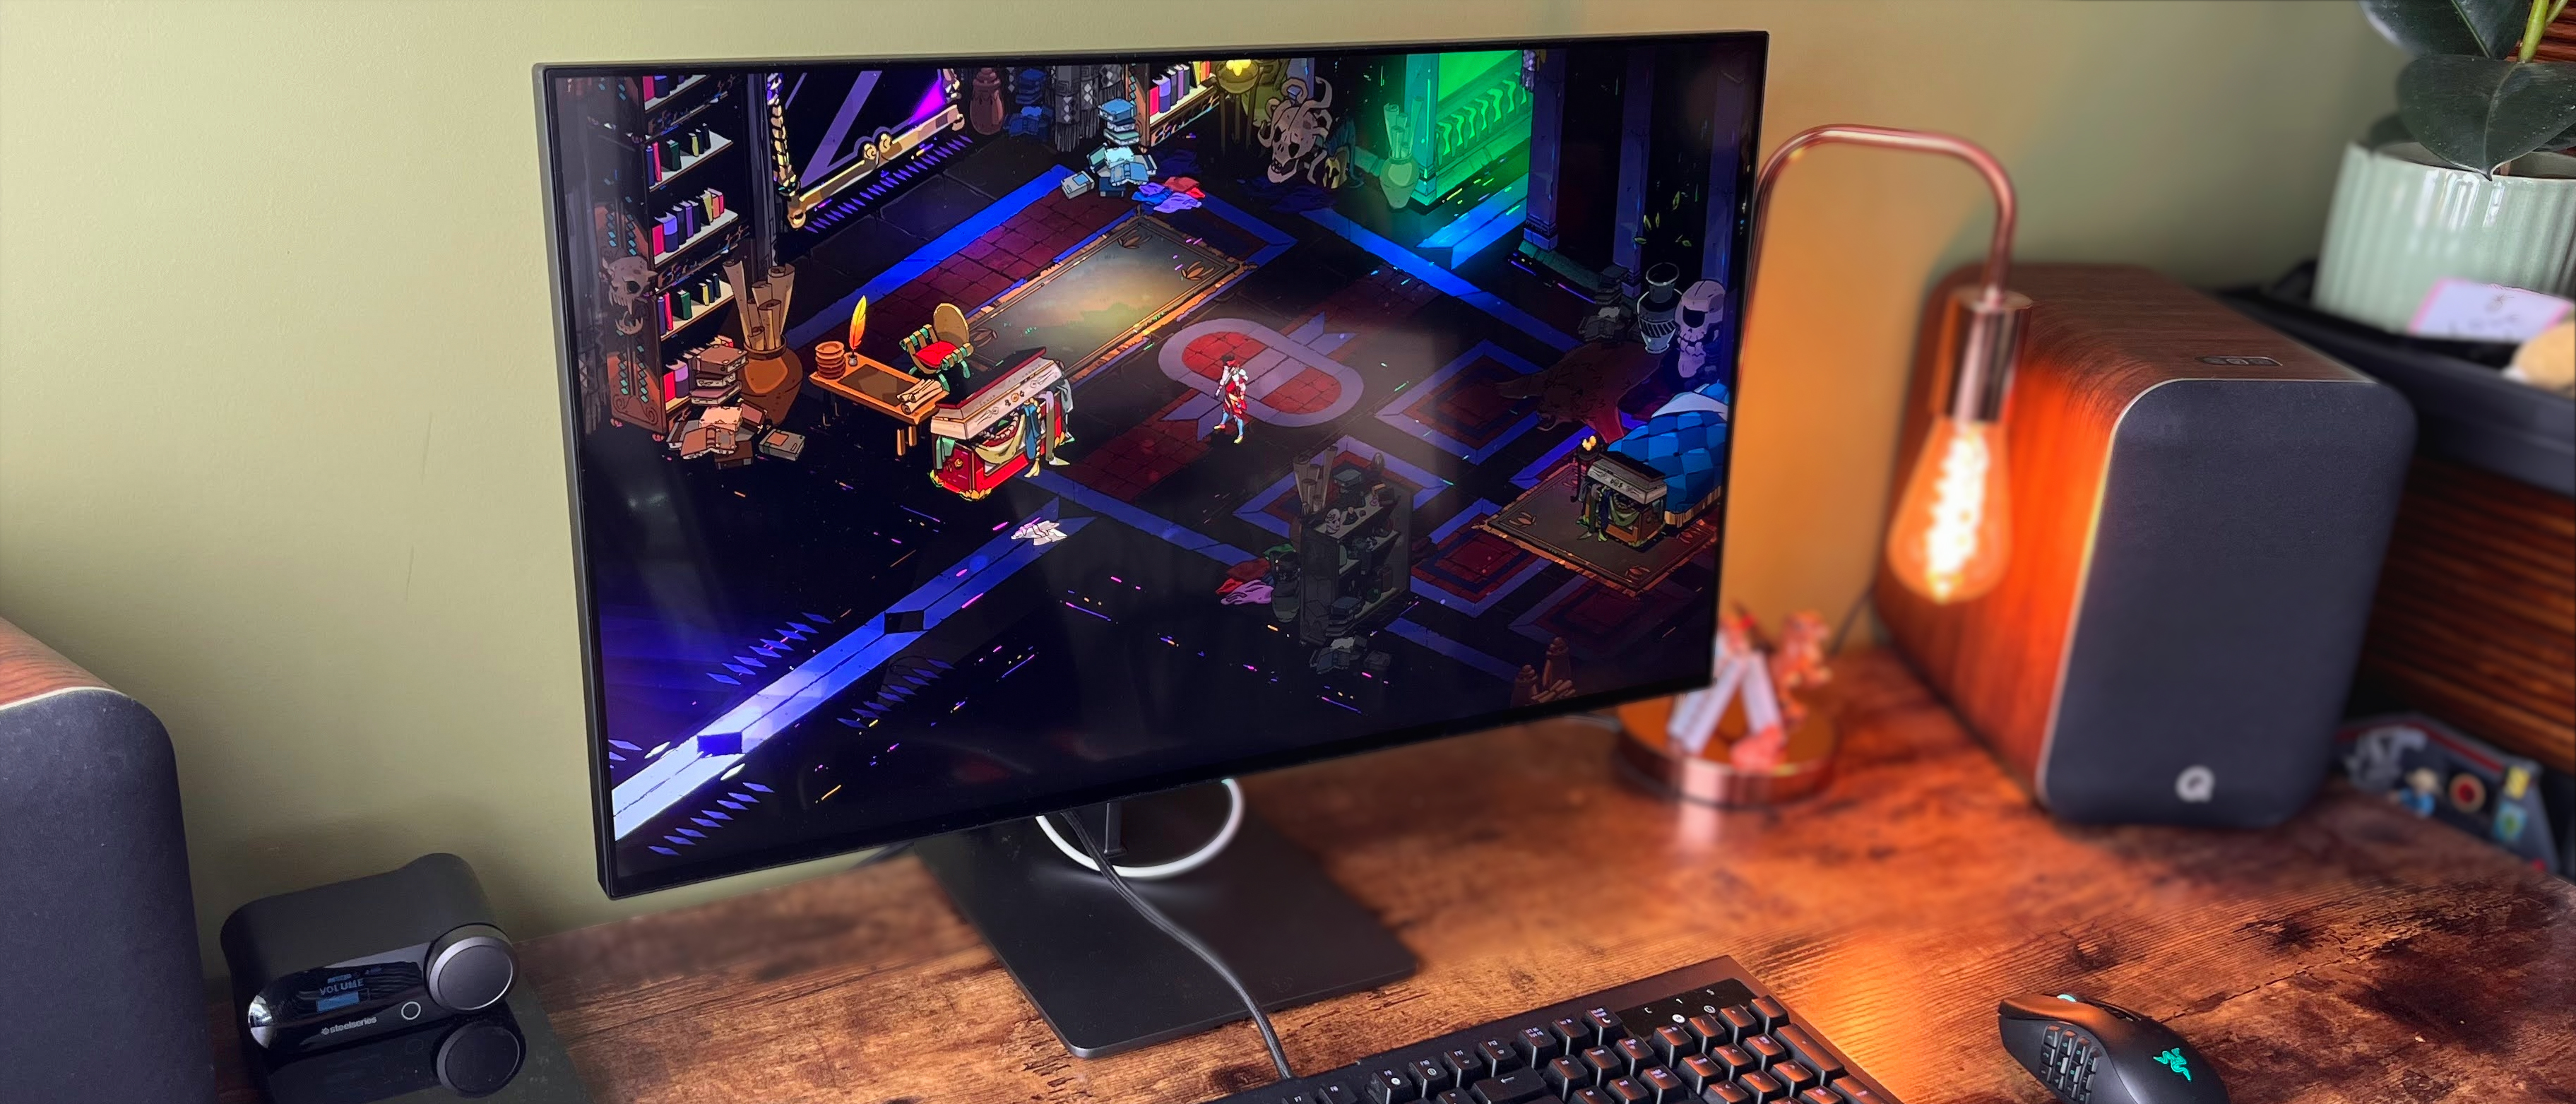 Dough Spectrum 4K 144Hz glossy monitor (ES07DC9) review: Glossy is ...